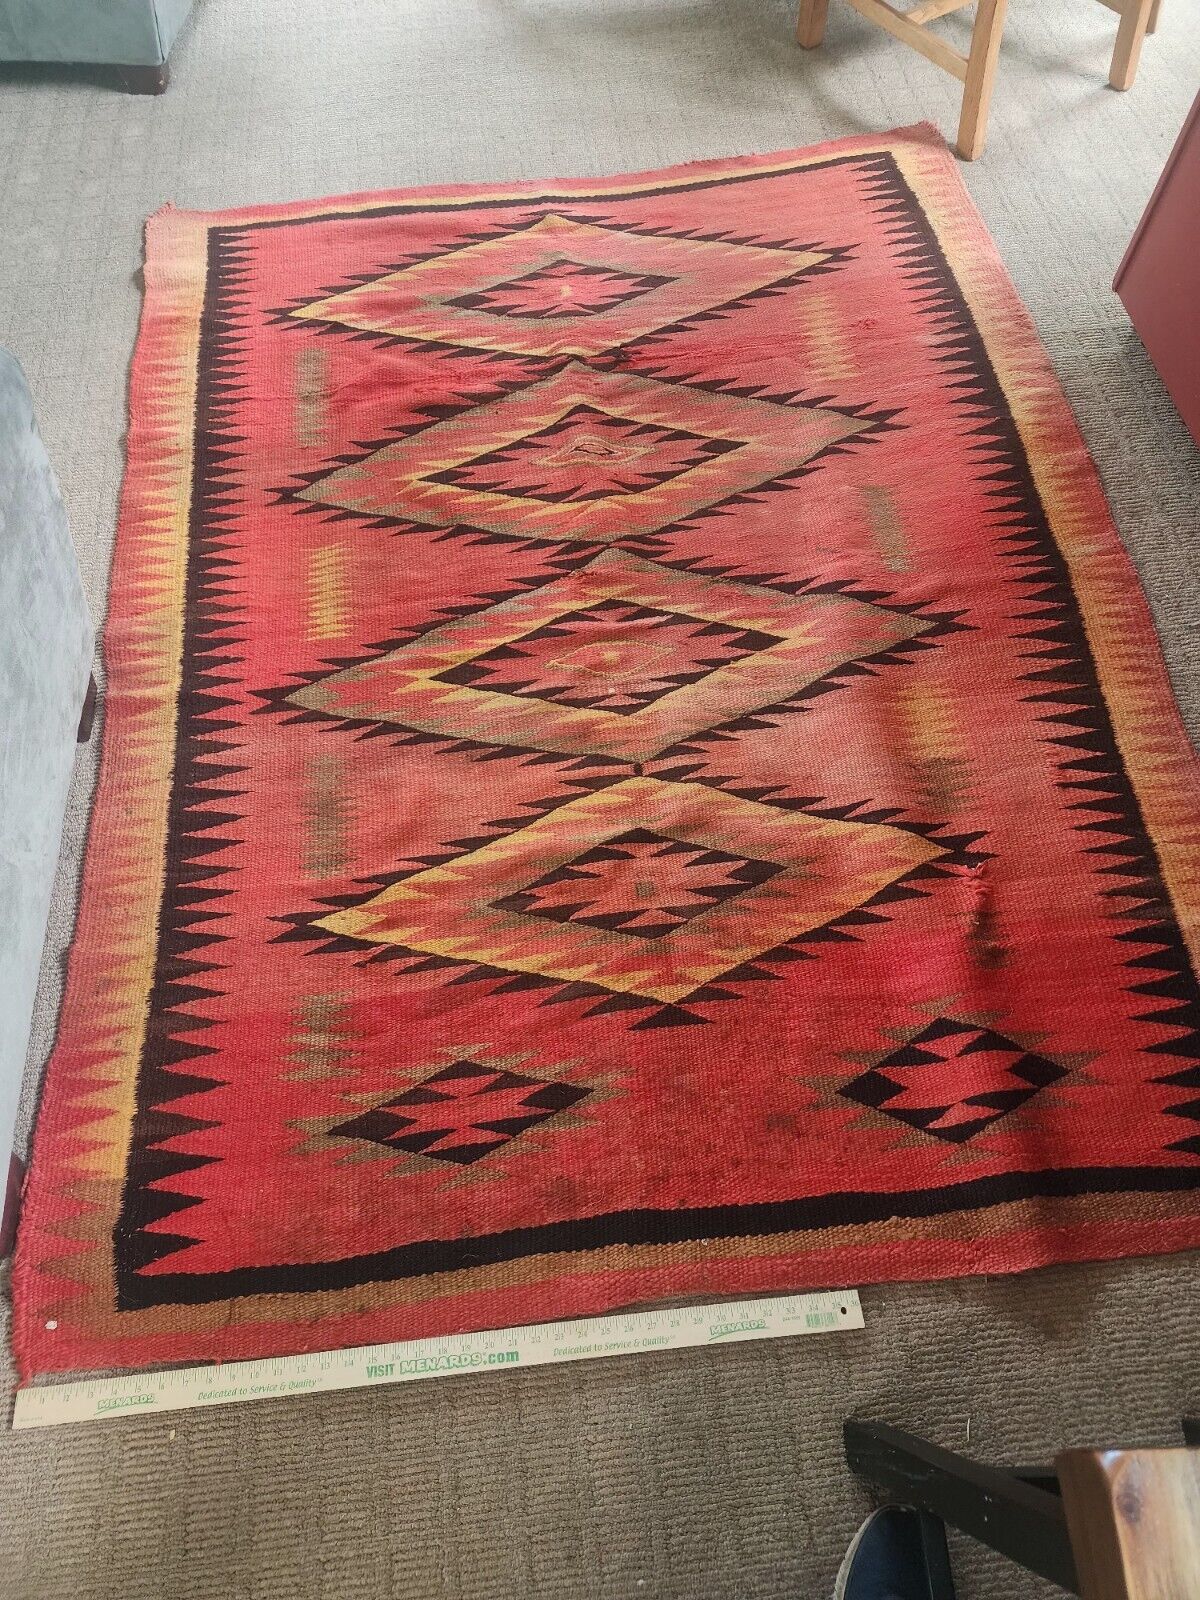 Large Authentic Native American Rug 78in   X 58in Approximately. Thinly Woven 